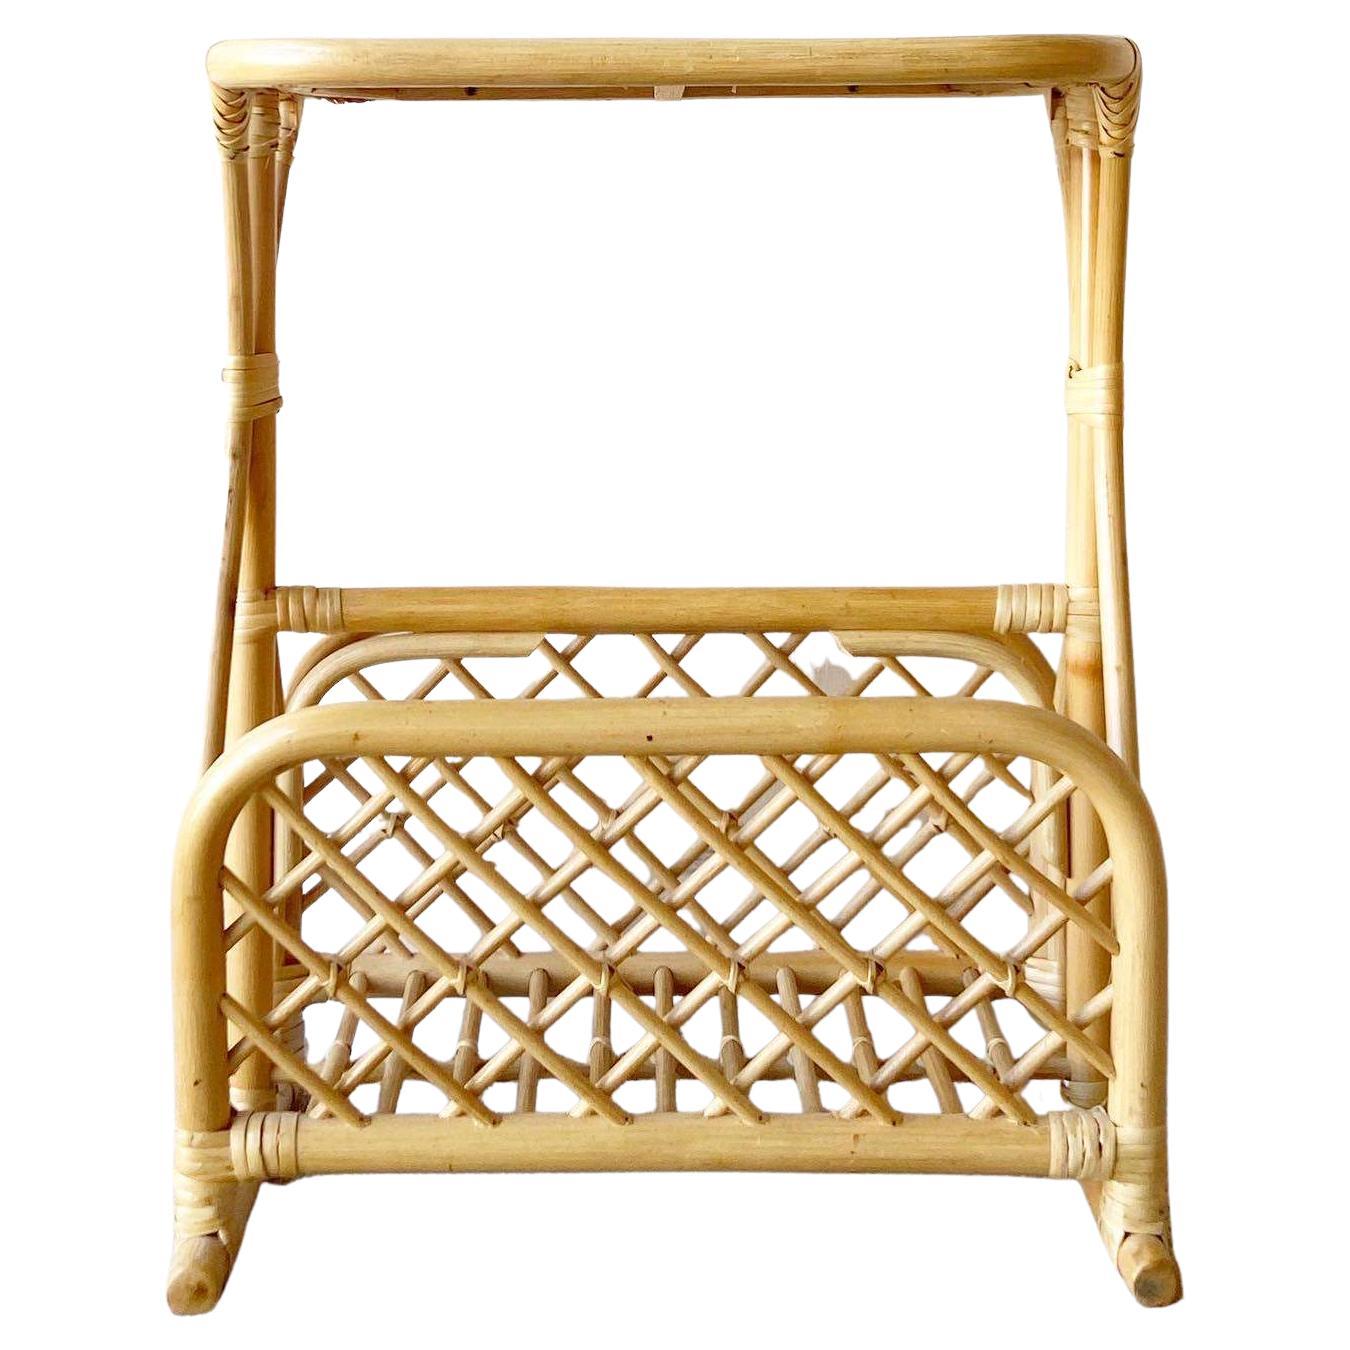 Exceptional vintage boho chair bamboo rattan magazine rack/side table. Features a wonderful sculpted design with a blonde finish and wicker top.
